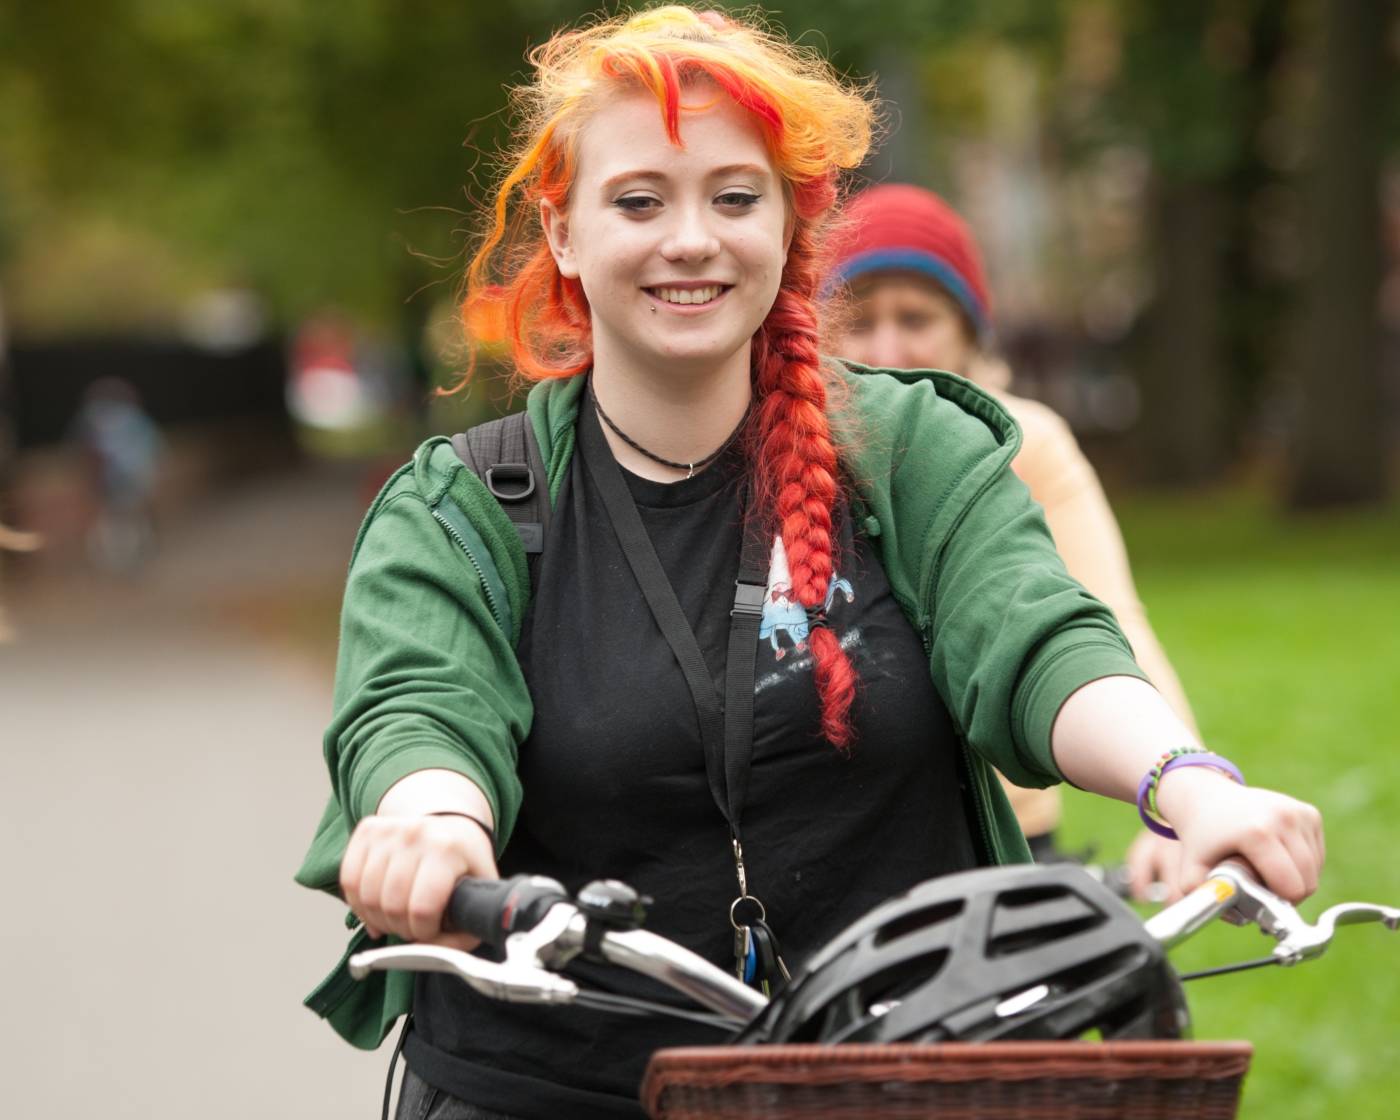 Red haired woman smiling on a bike with a basket